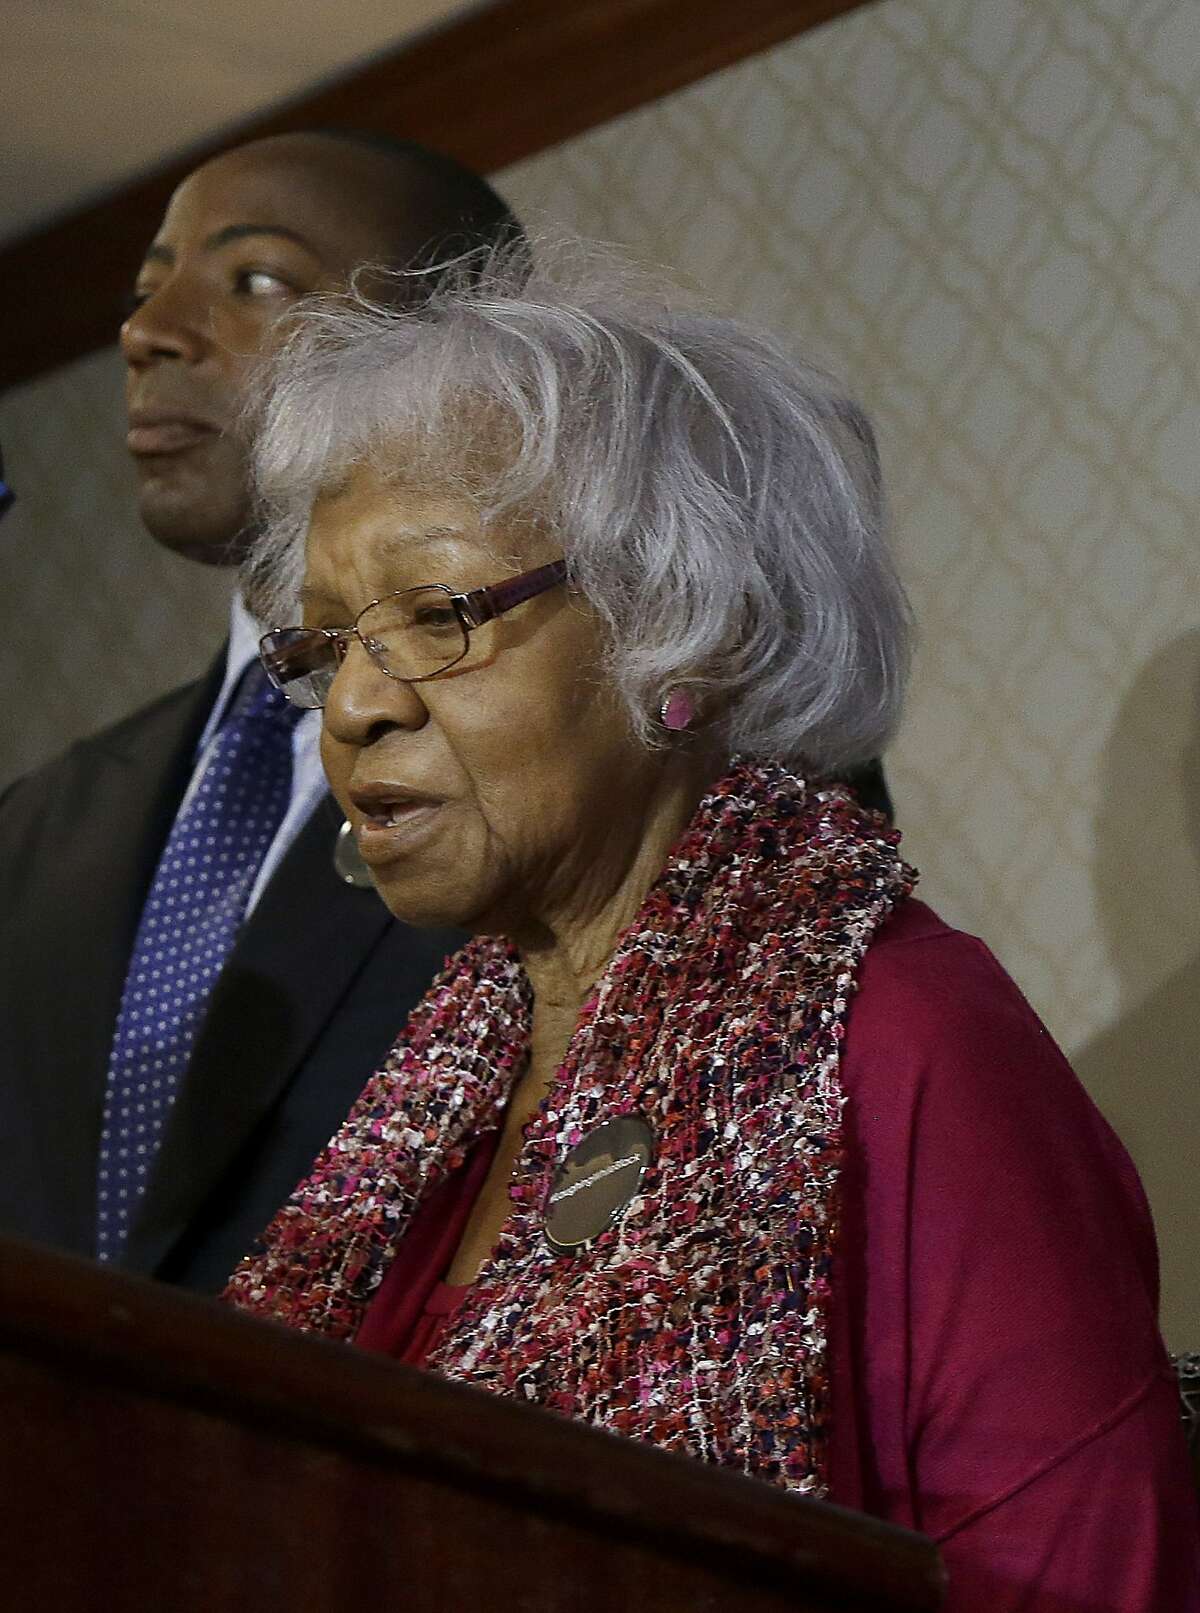 Katherine Neal, one of the plaintiffs filing a lawsuit over their ejection from a Napa Valley Wine Train, speaks in front of attorney Waukeen Q. McCoy during a news conference, Thursday, Oct. 1, 2015, in San Francisco. The group of mostly black women, members of a book club, settled their lawsuit in April 2016 for an undisclosed amount.